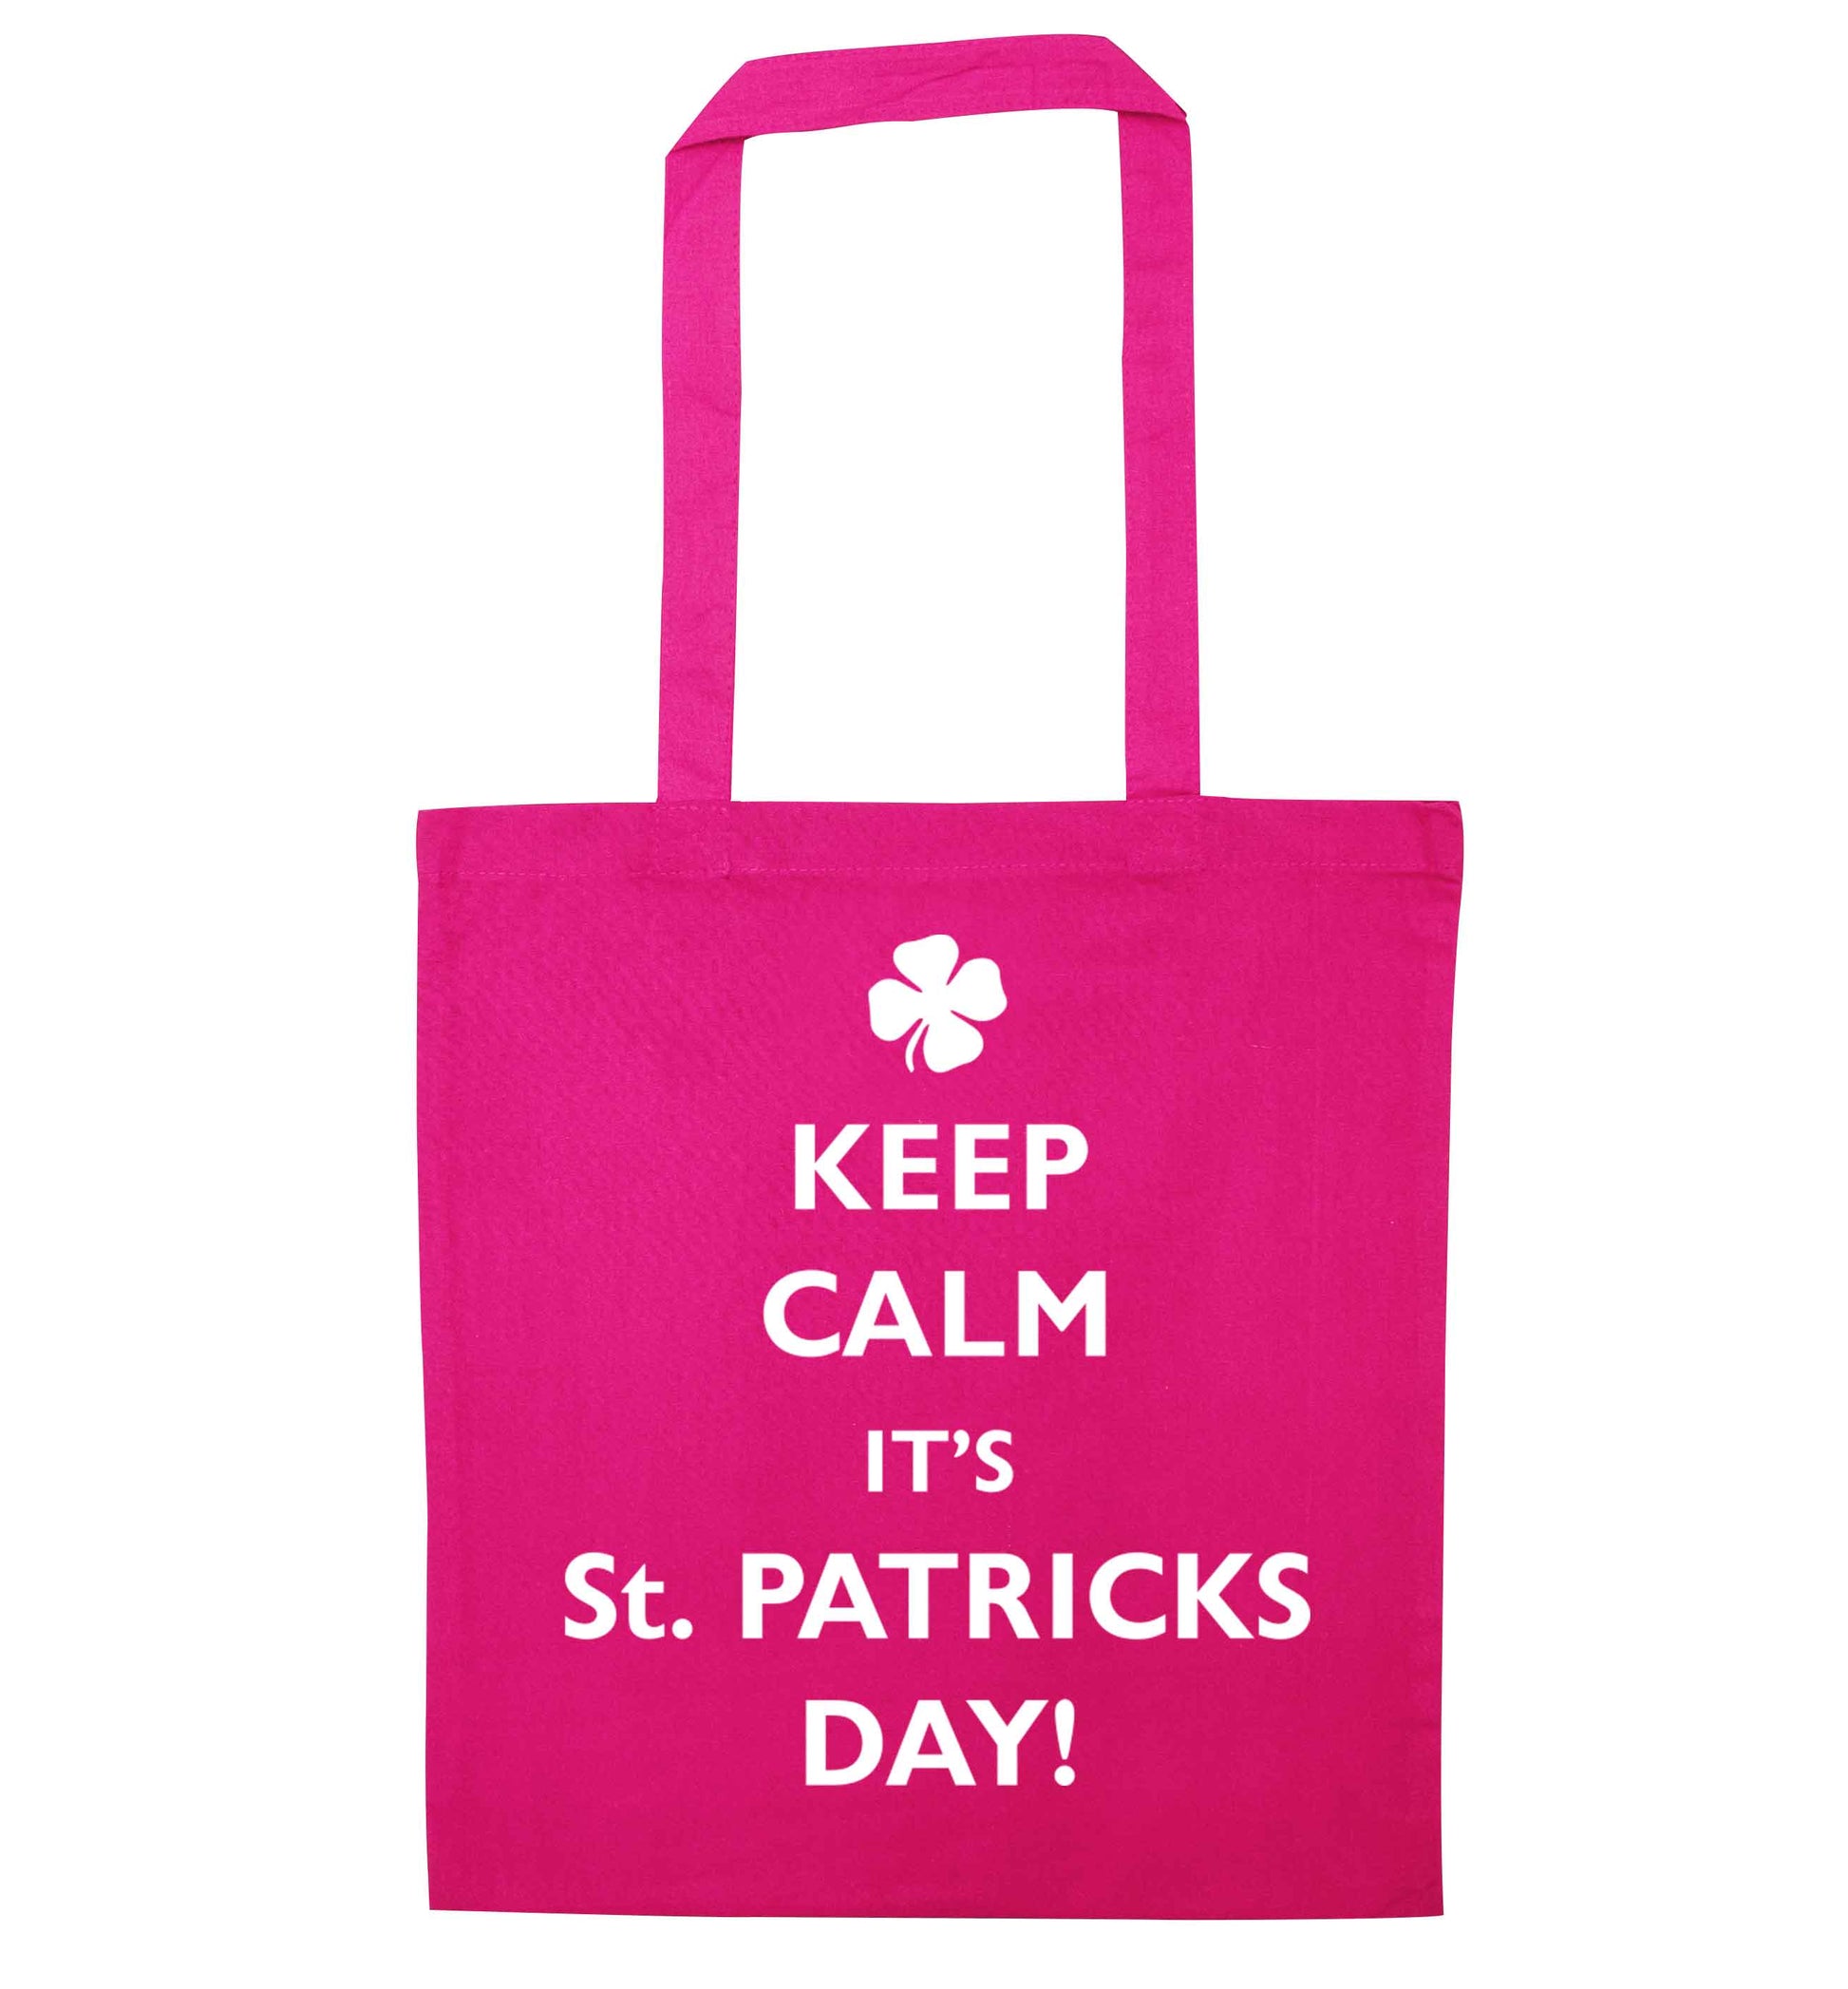 Keep calm it's St.Patricks day pink tote bag